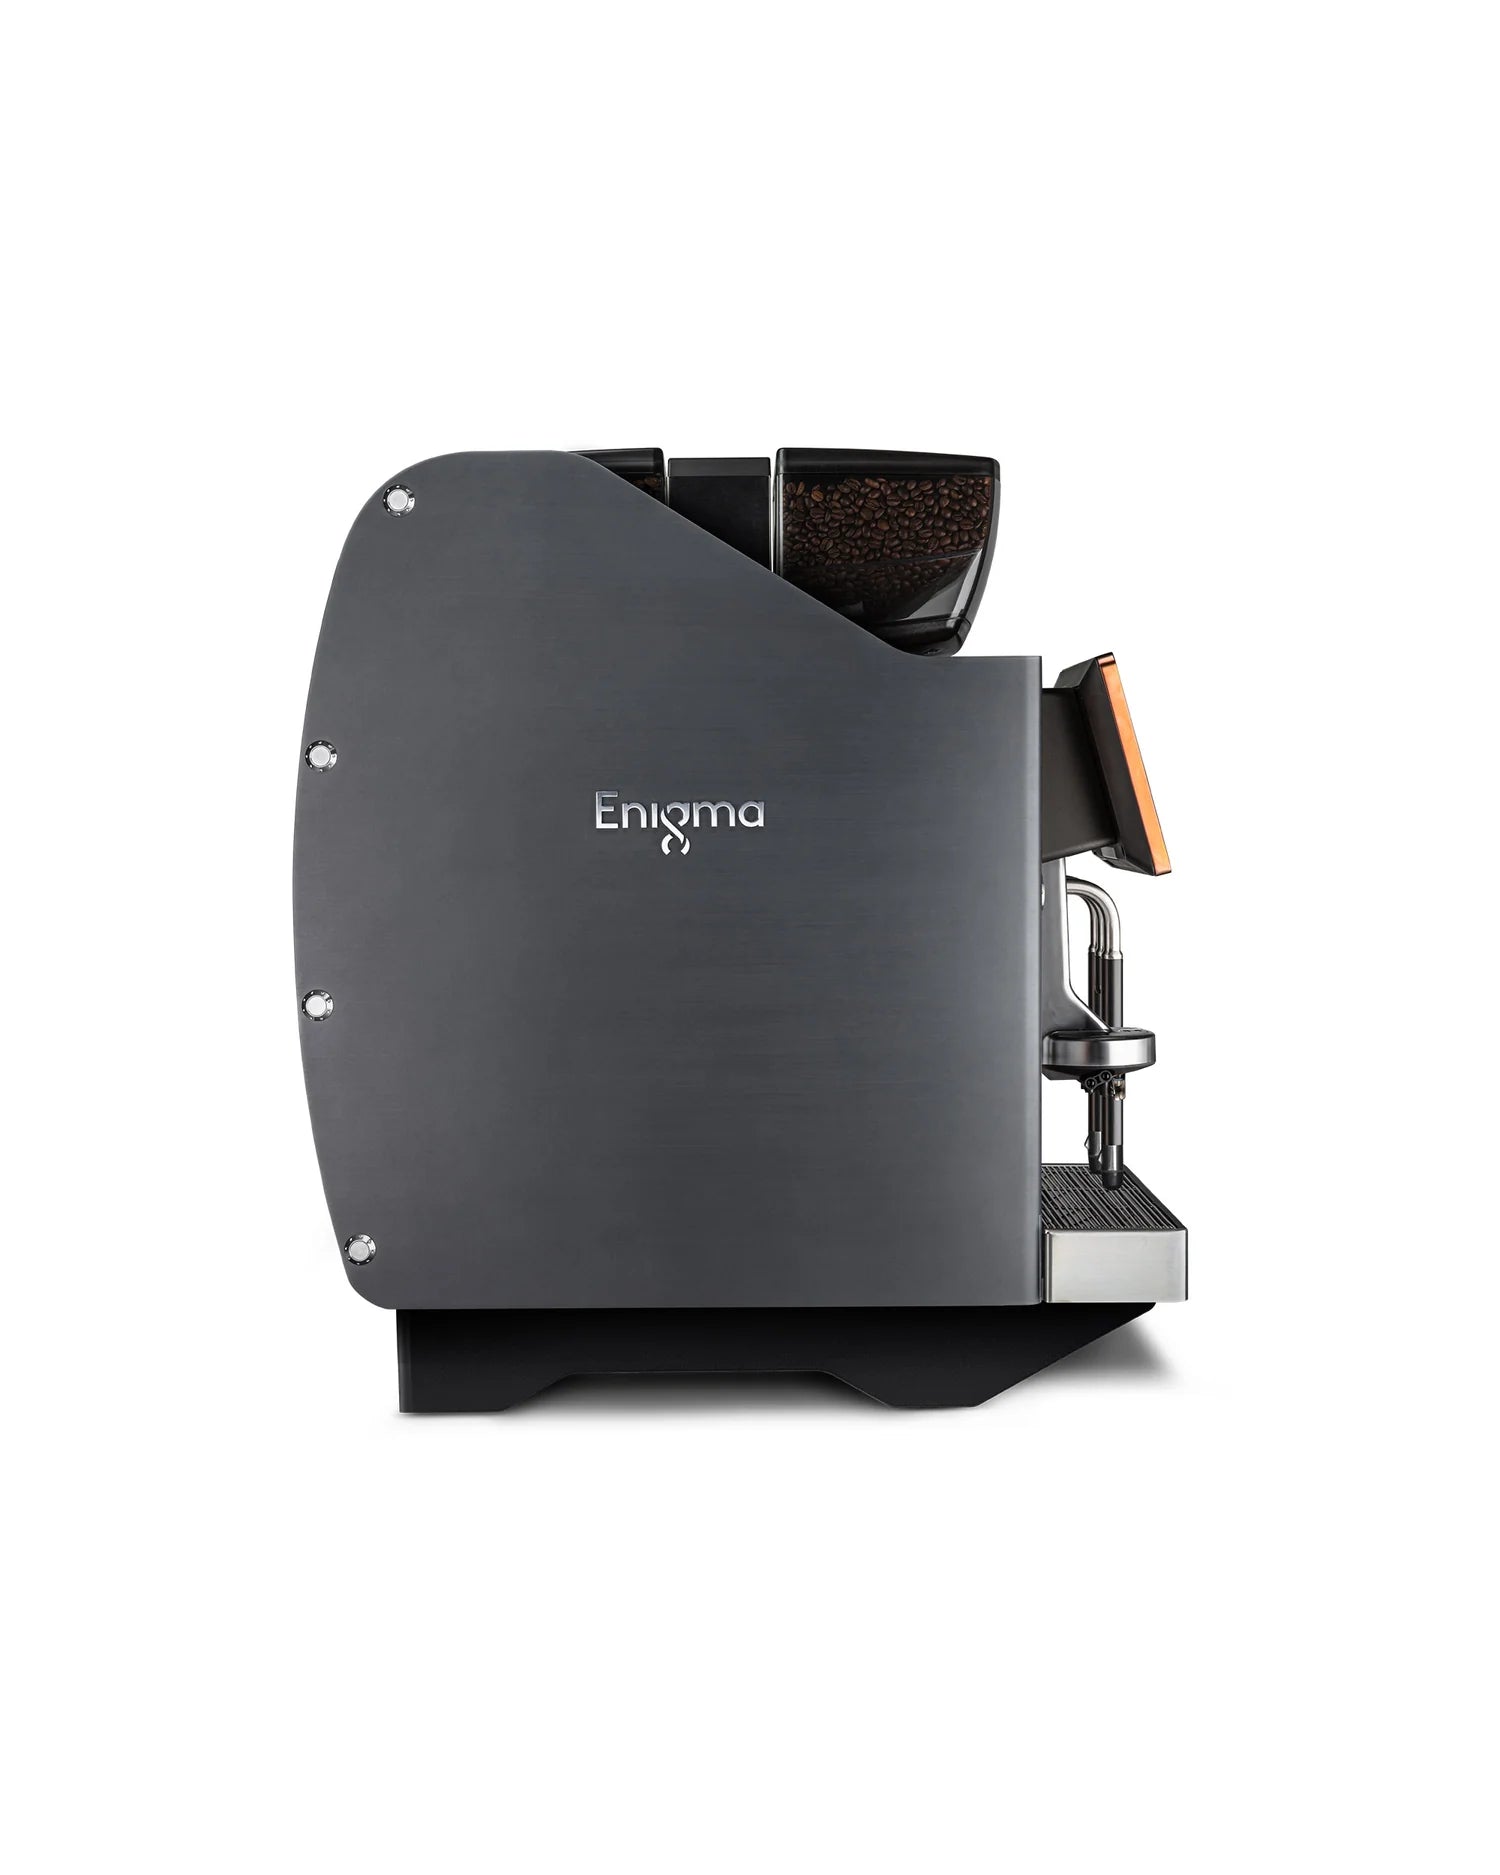 Eversys - Enigma E'4S X-WIDE/ST